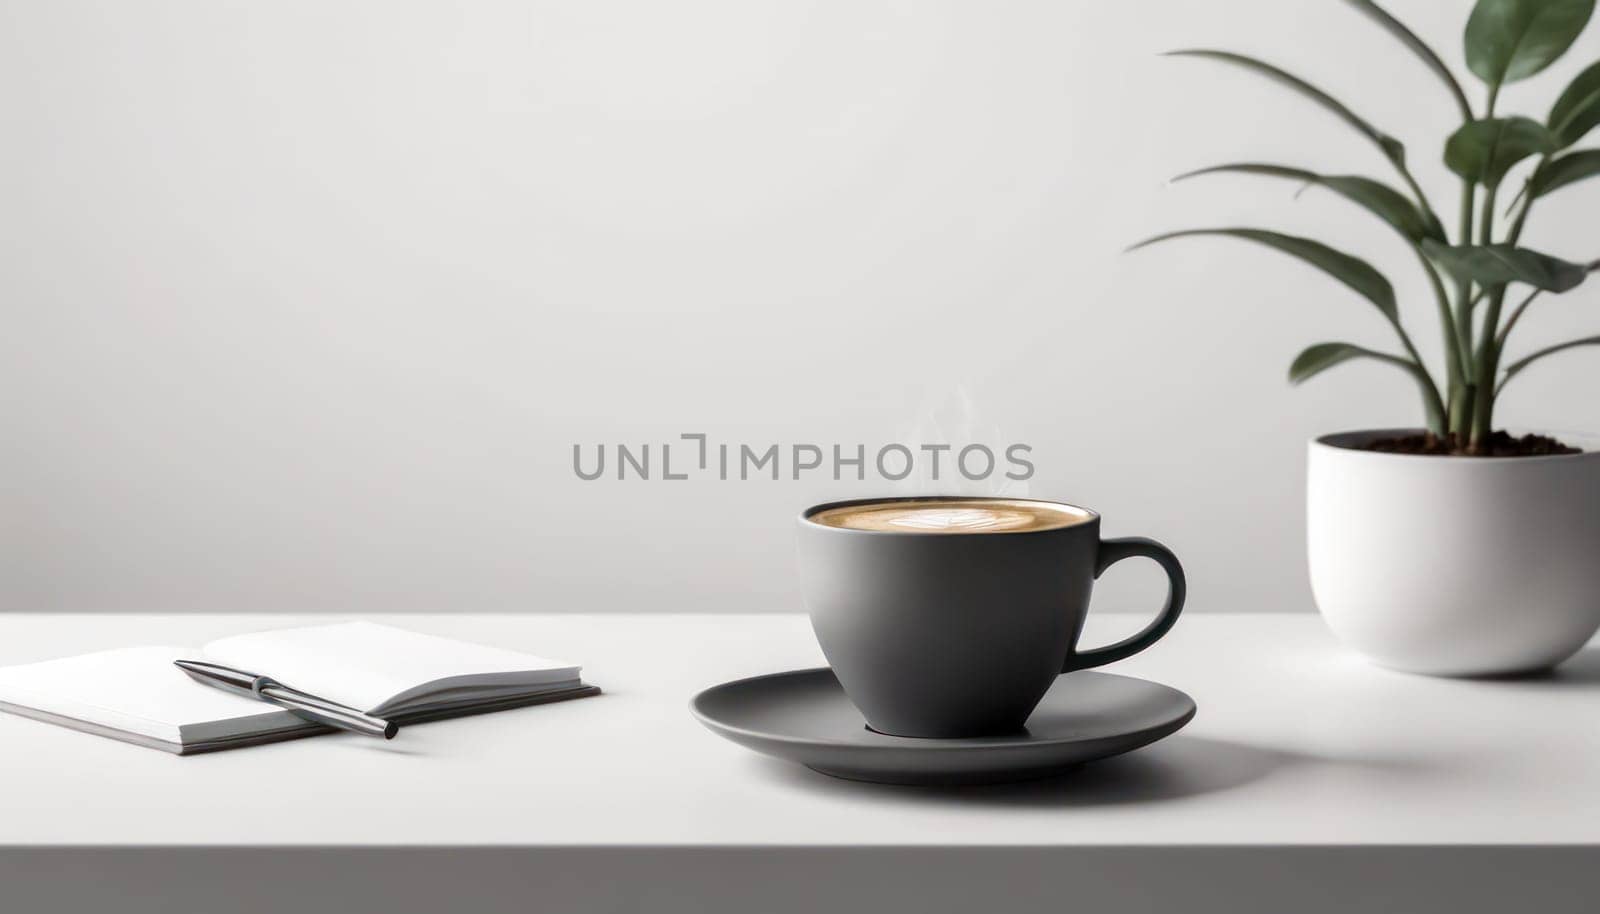 Morning Coffee: Cup filled with steaming coffee rests on a clean white table, casting a subtle shadow. creating a serene morning scene